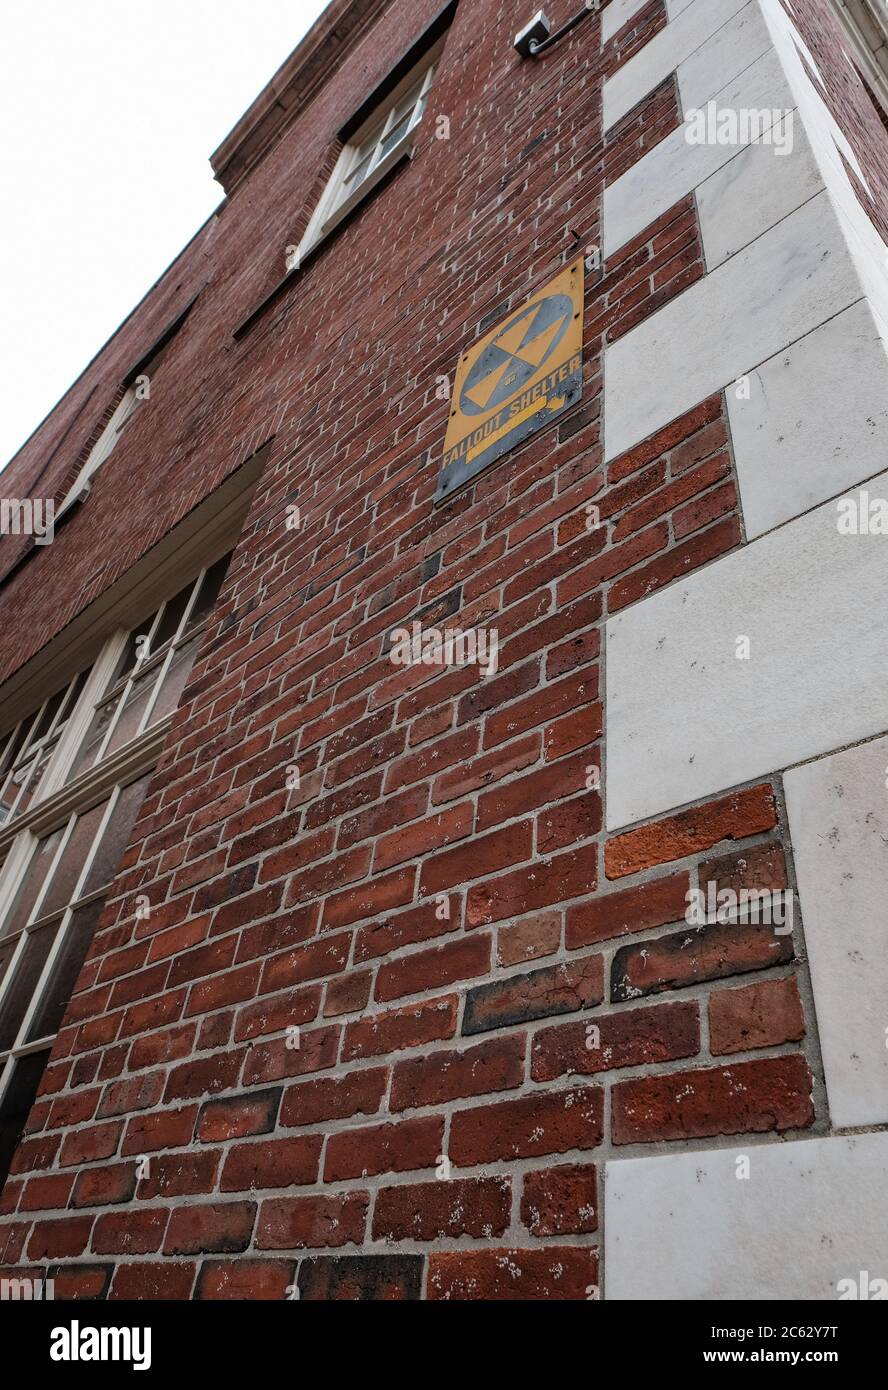 Vintage nuclear fallout sign seen fixed to a building in a US eastern town. Stock Photo